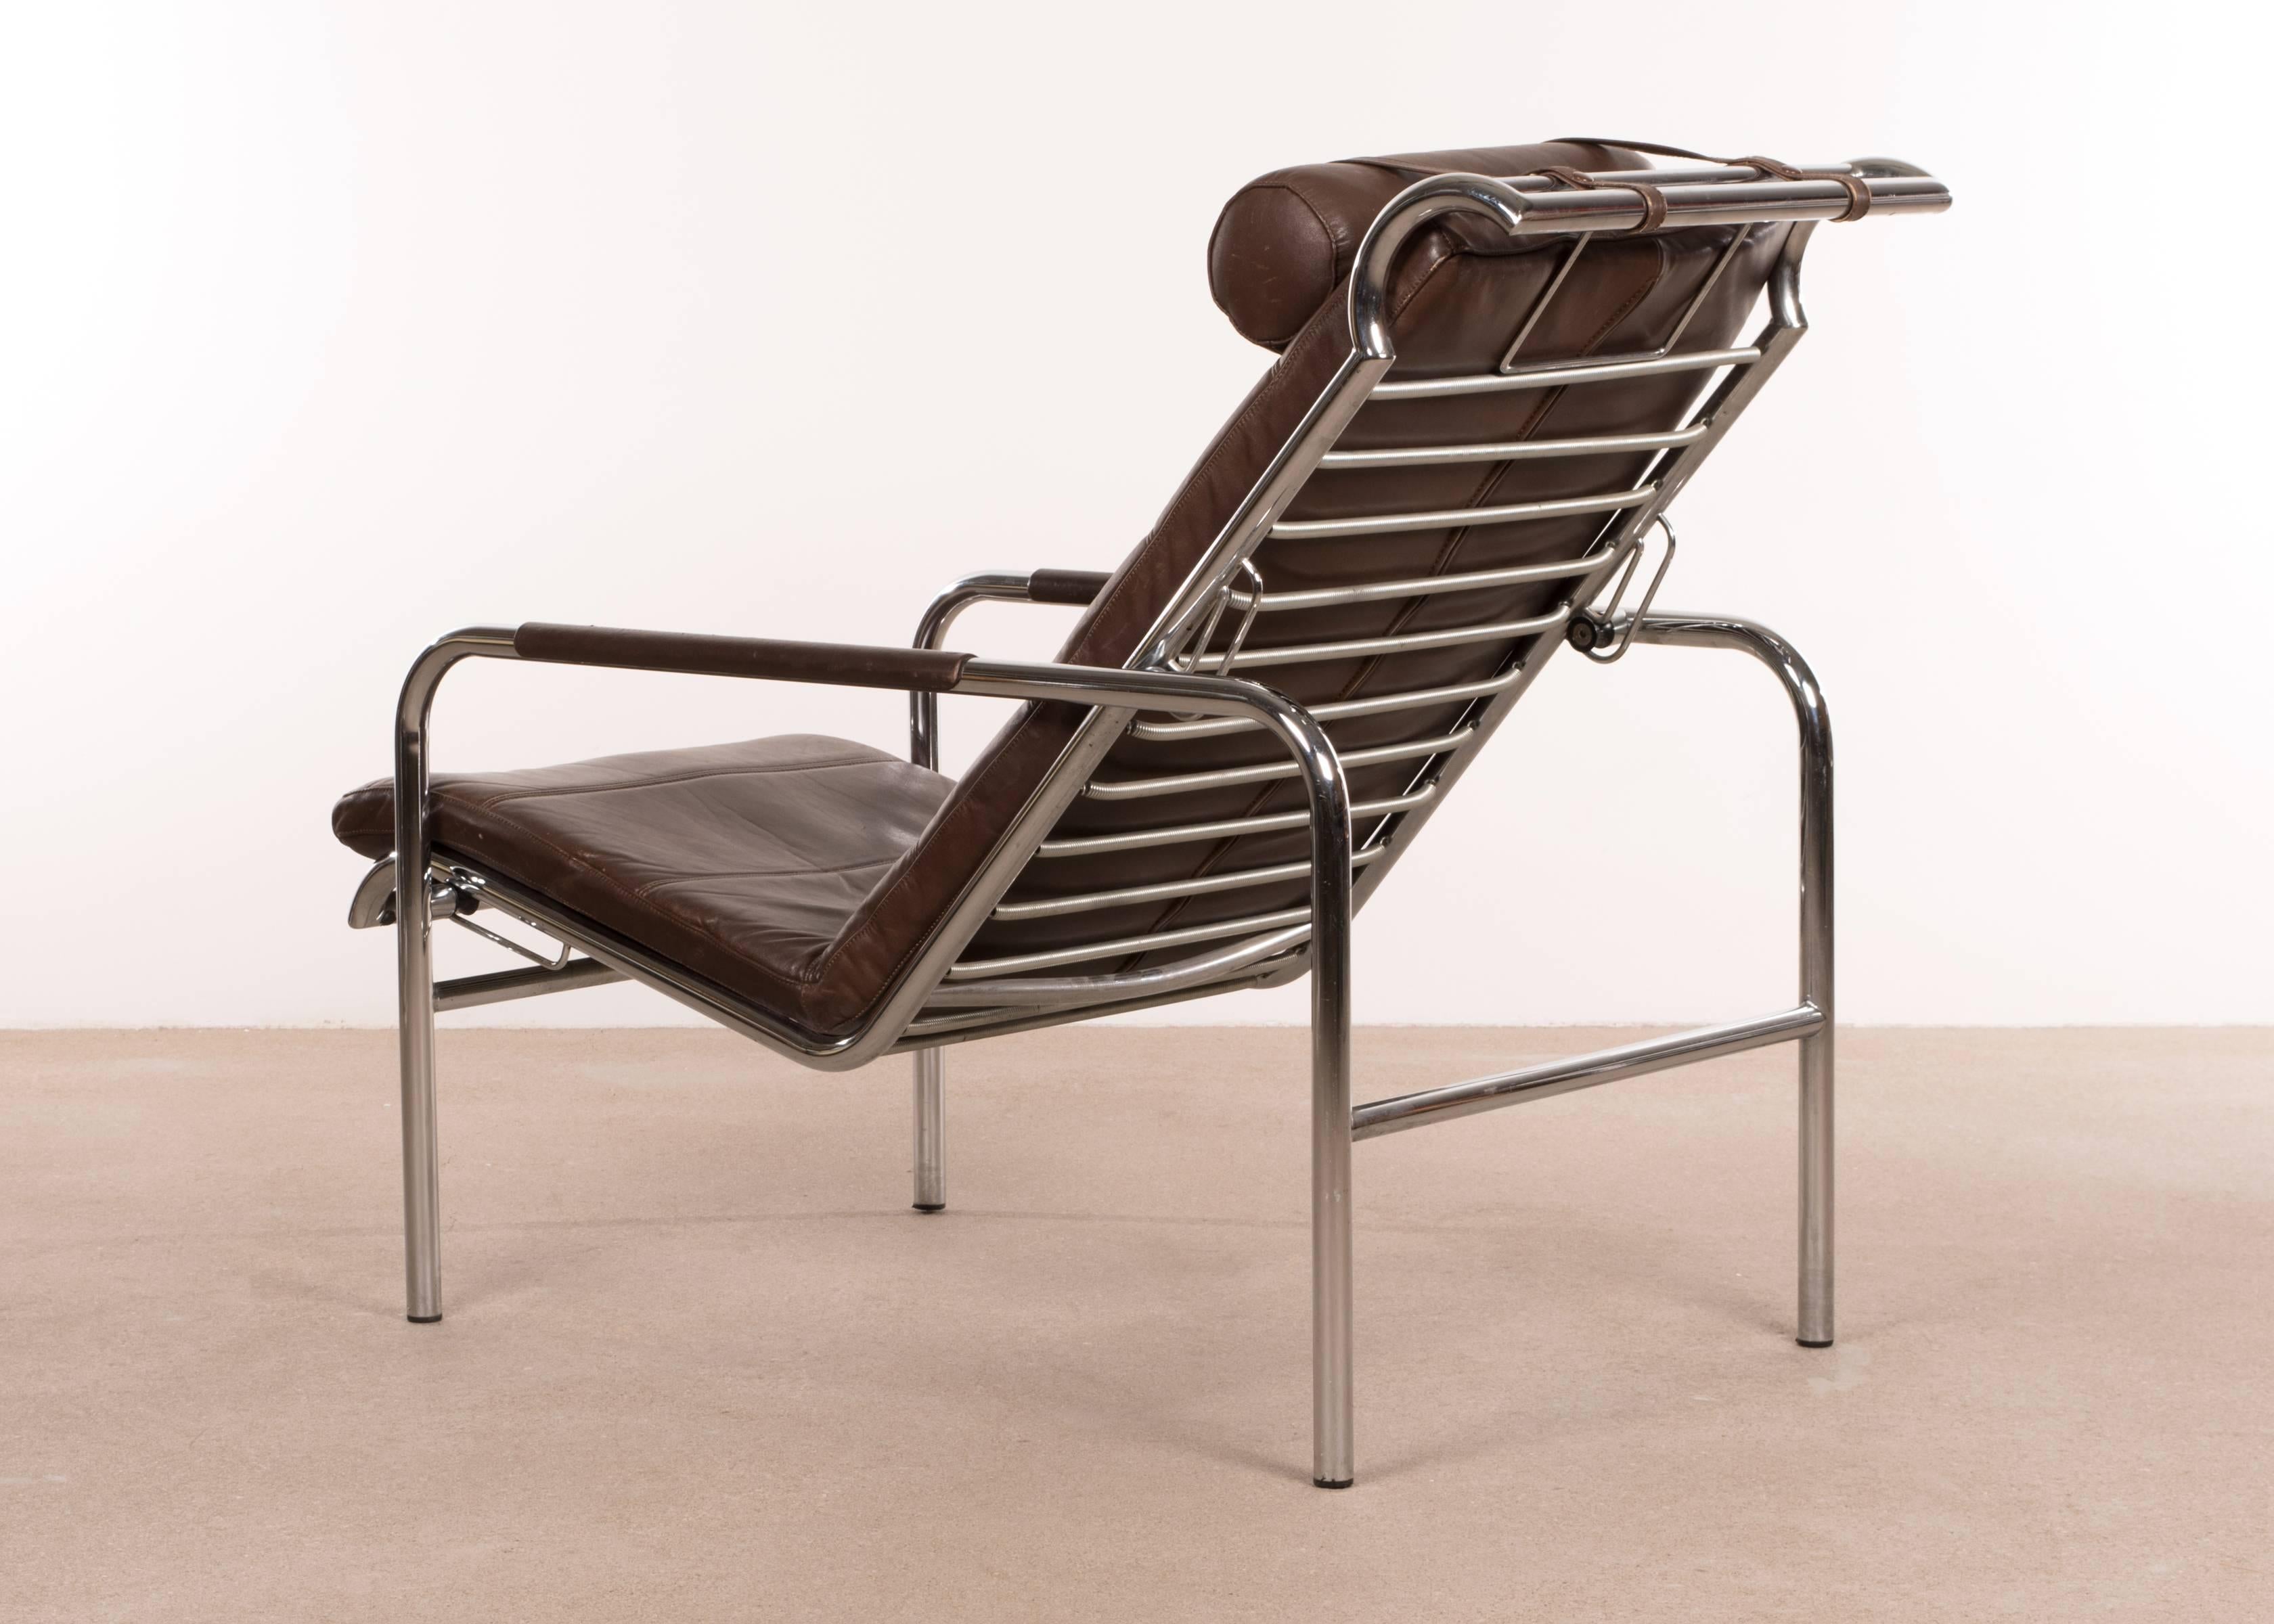 Genni chaise designed in 1935 by Gabriele Mucchi for Zanotta. Comfortable lounge chair with leather upholstery and chrome-plated steel frame. All in very good original condition with only light traces of use. Signed with manufacturer's label and